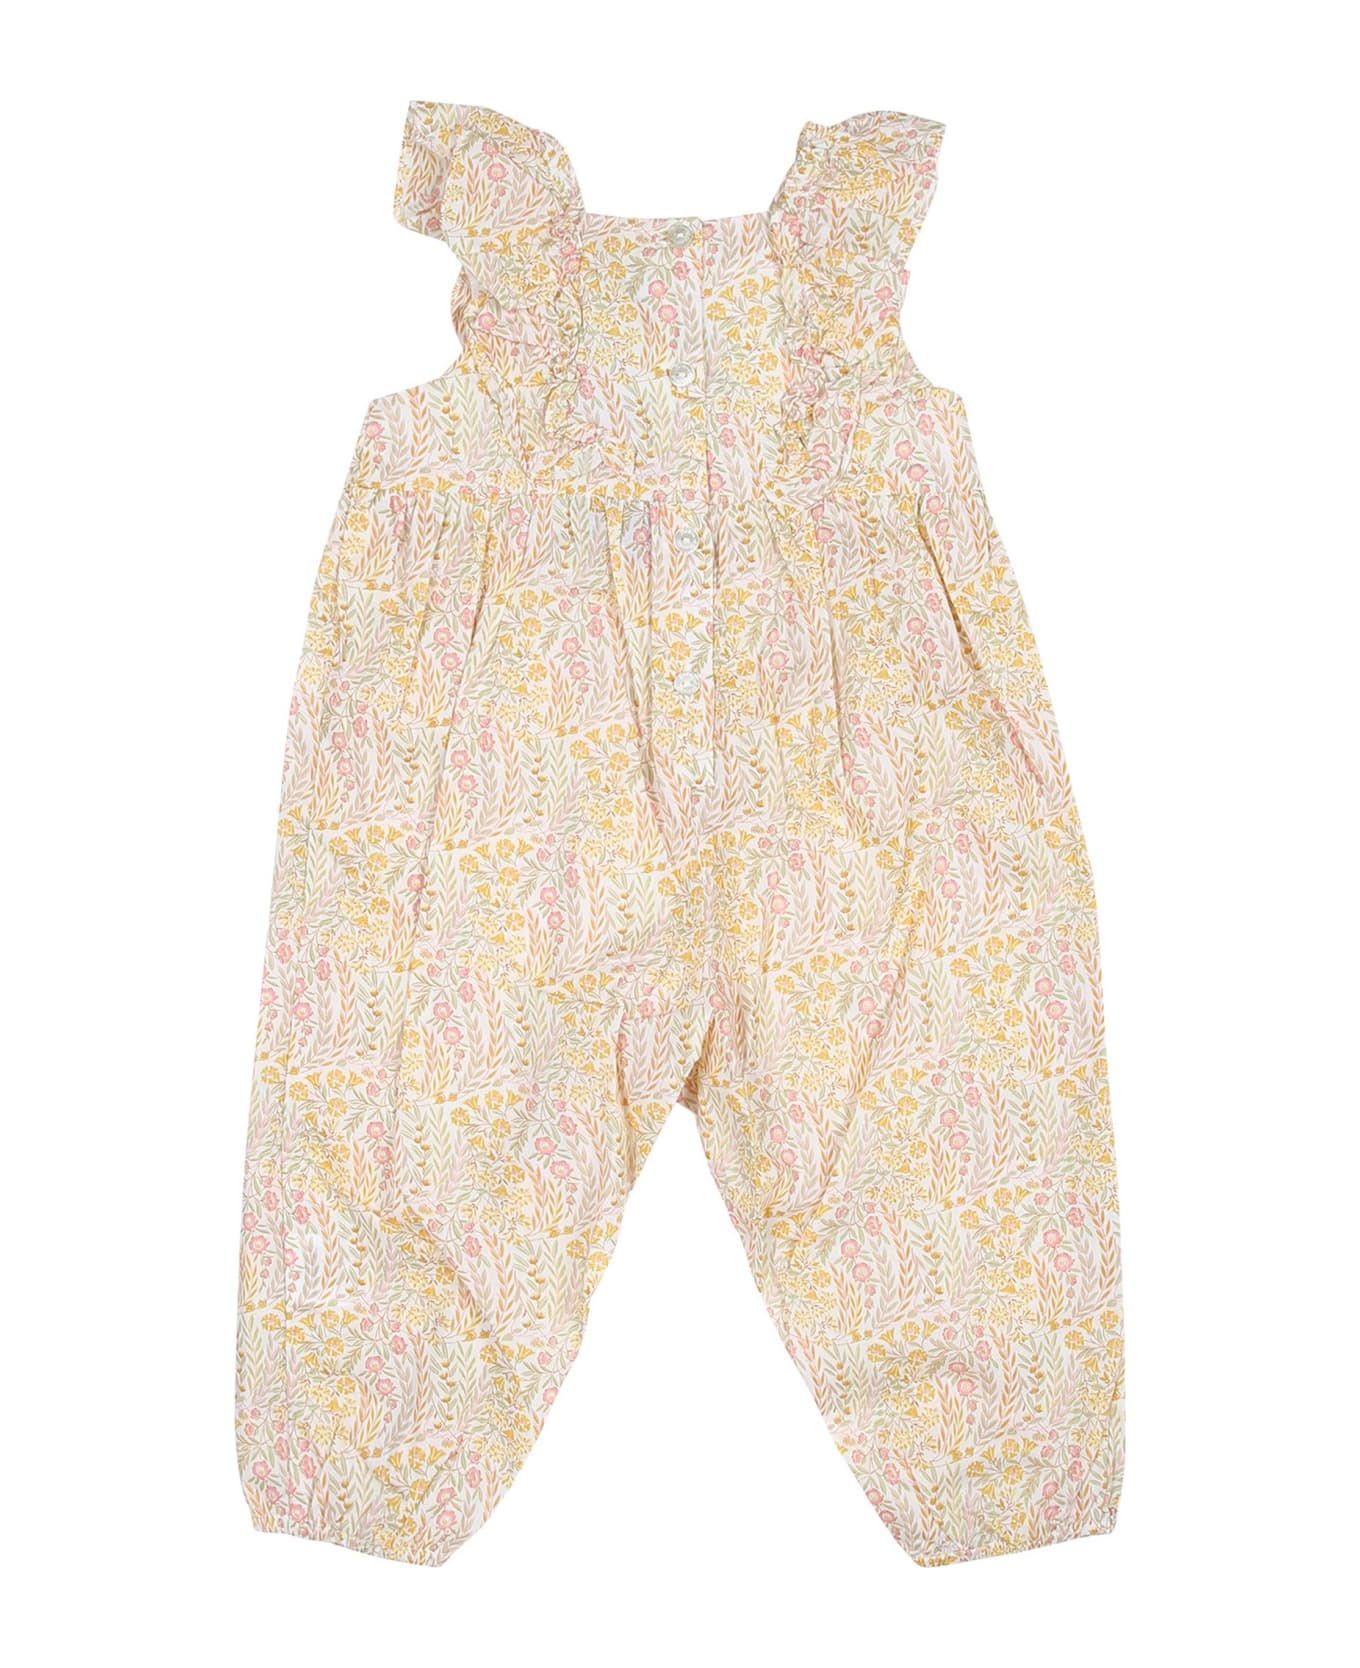 Tartine et Chocolat Ivory Dungarees For Baby Girl With Liberty Fabric - Ivory